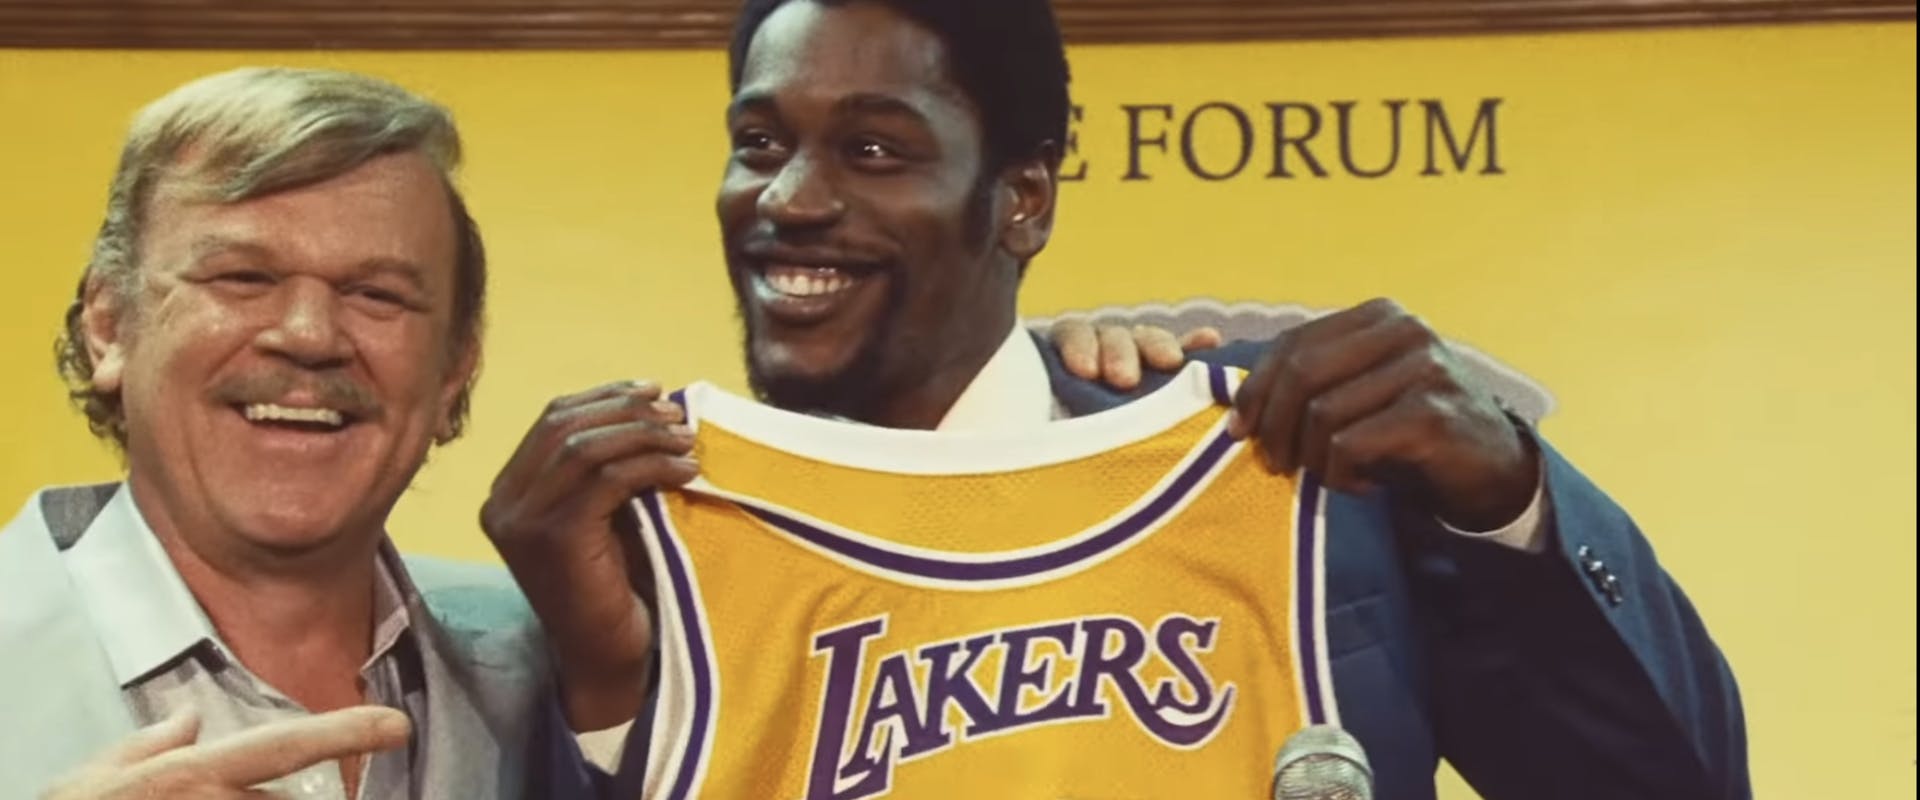 Winning Time: The Rise of the Lakers Dynasty 